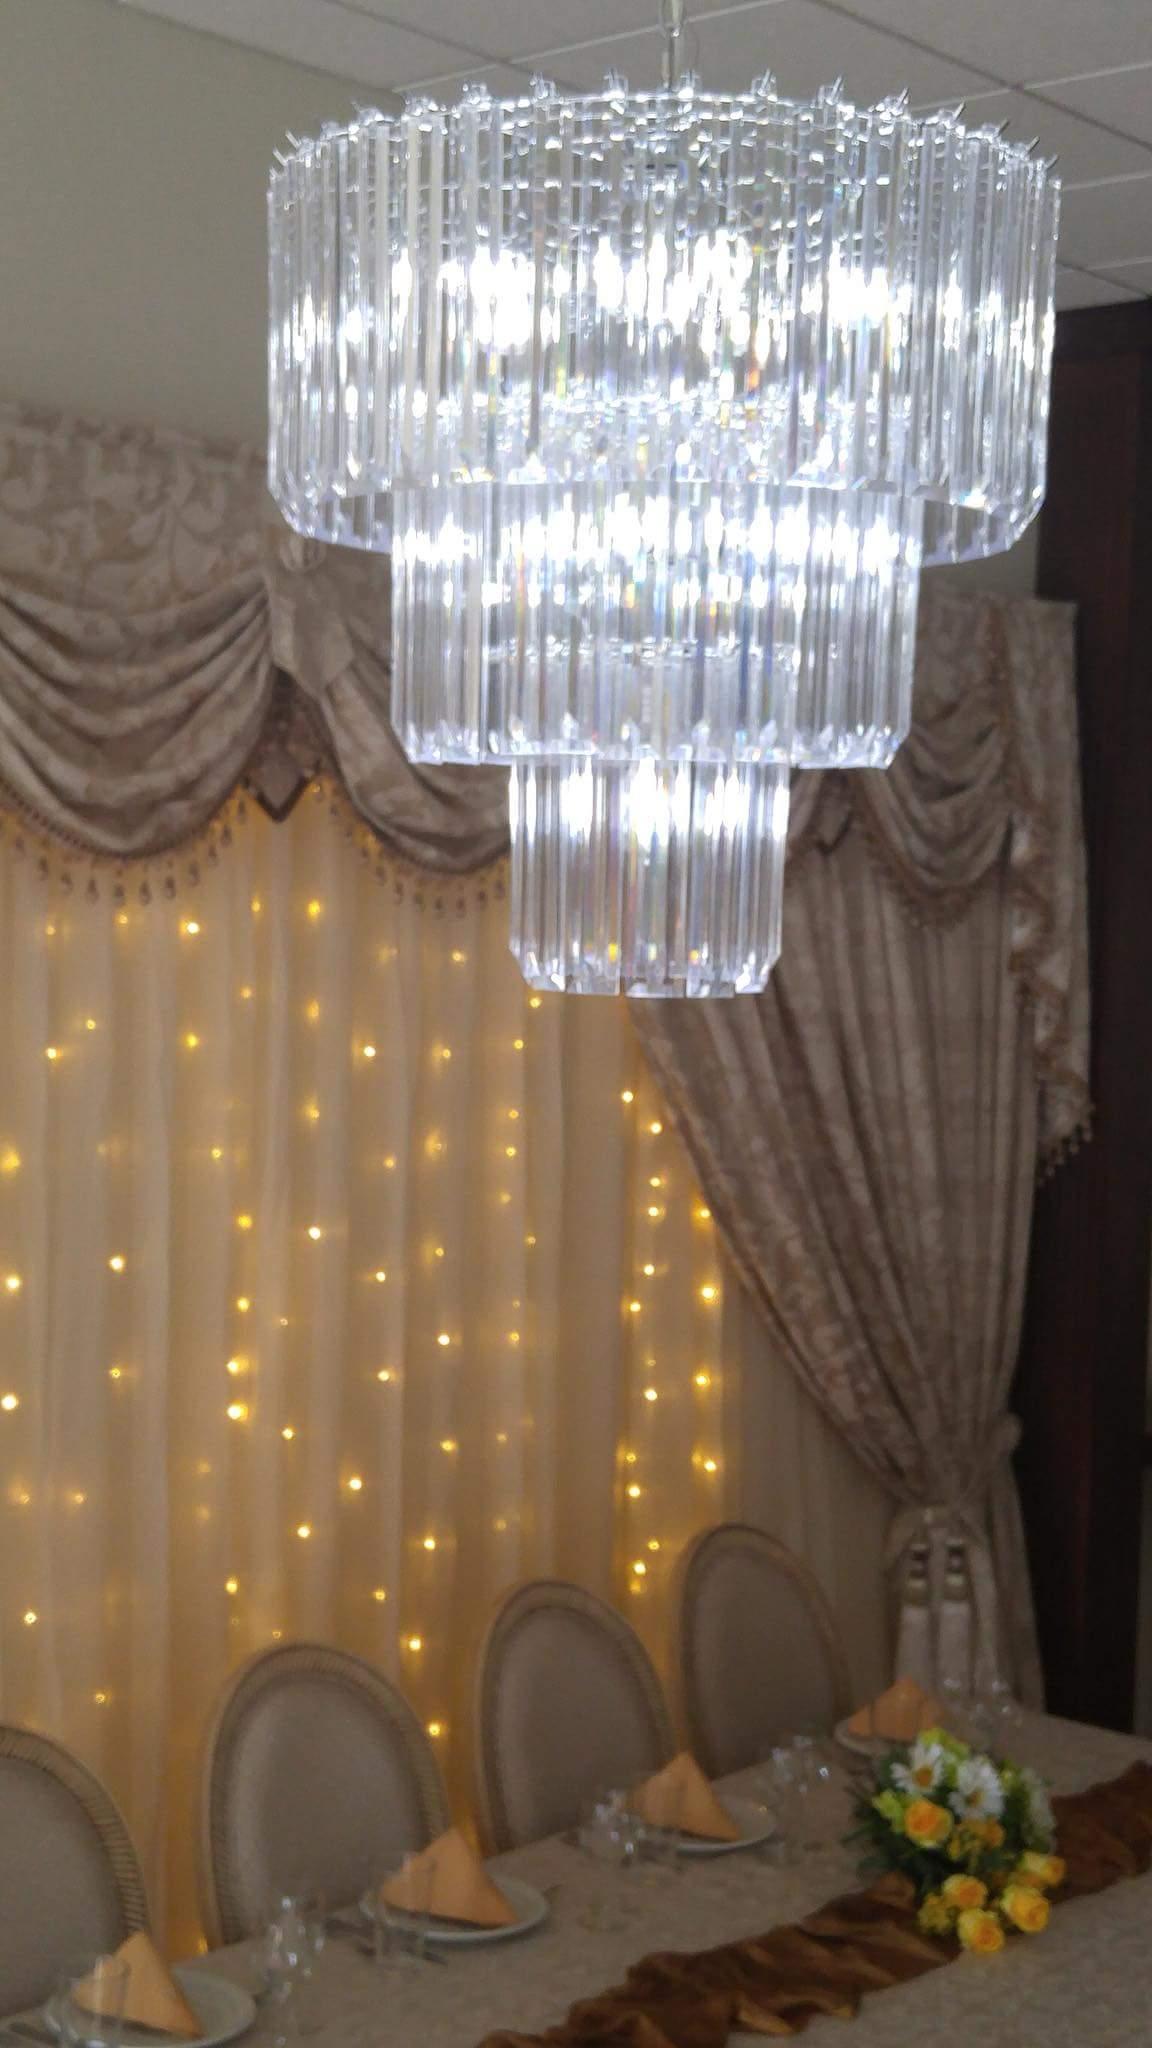 Exquisite chandeliers on either side of the backdrop for a grand feel during special events.